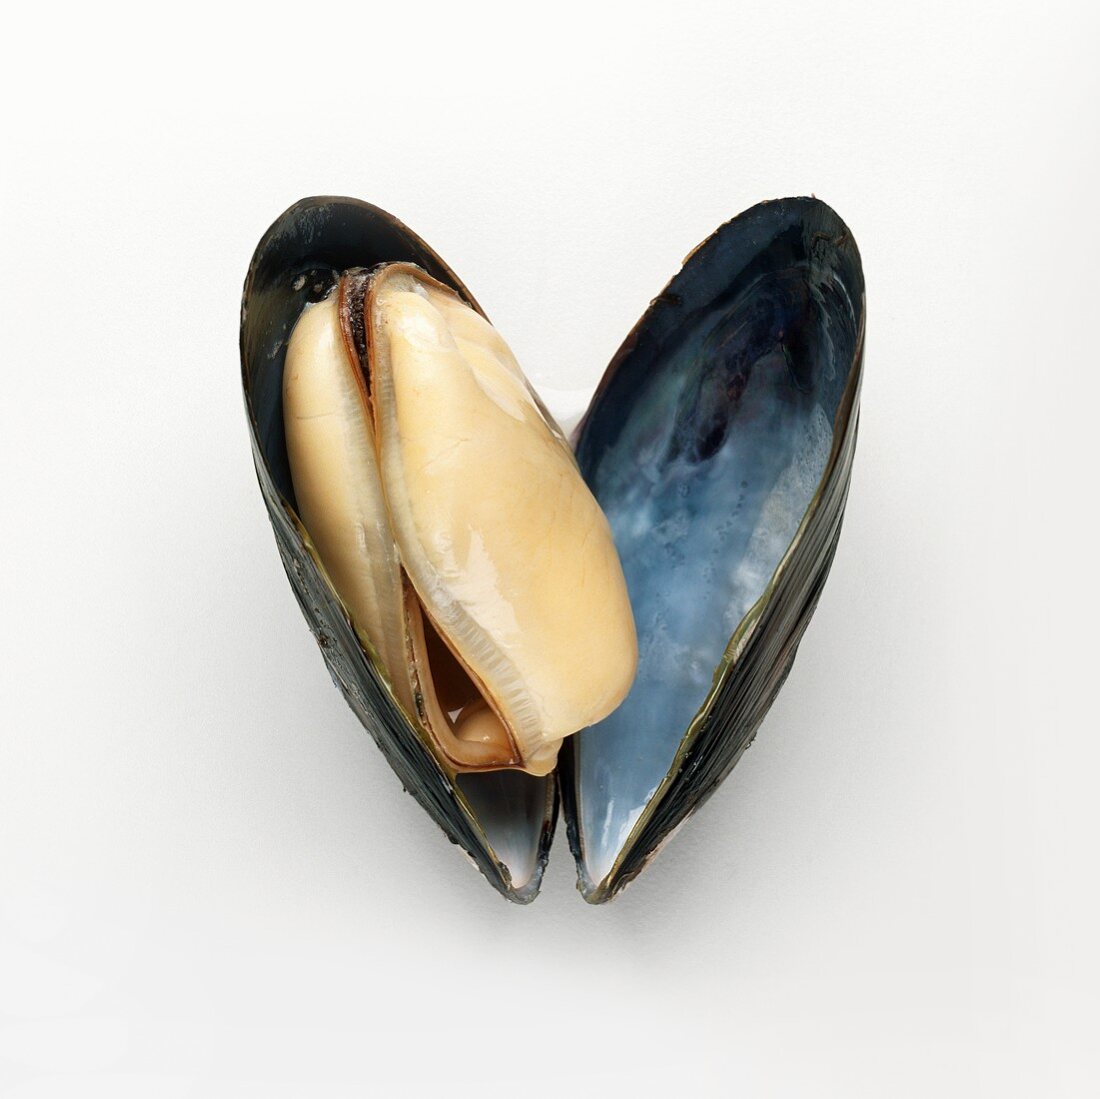 Opened Mussel on White